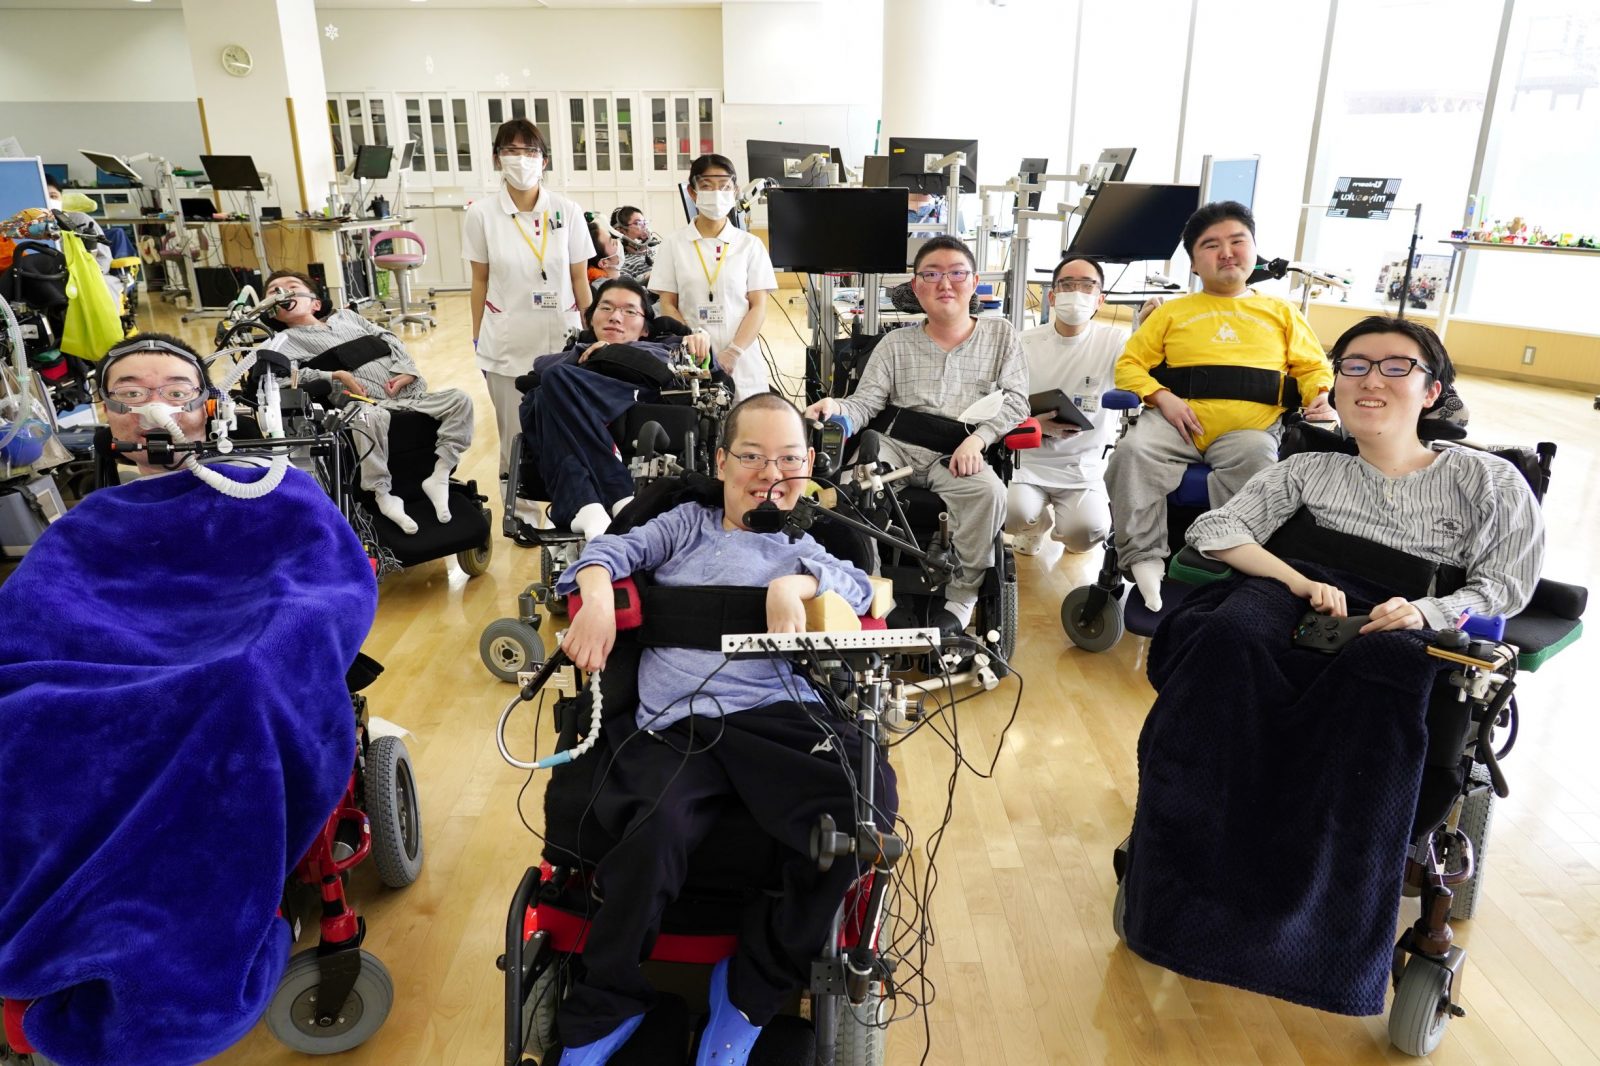 A group of smiling people in wheelchairs